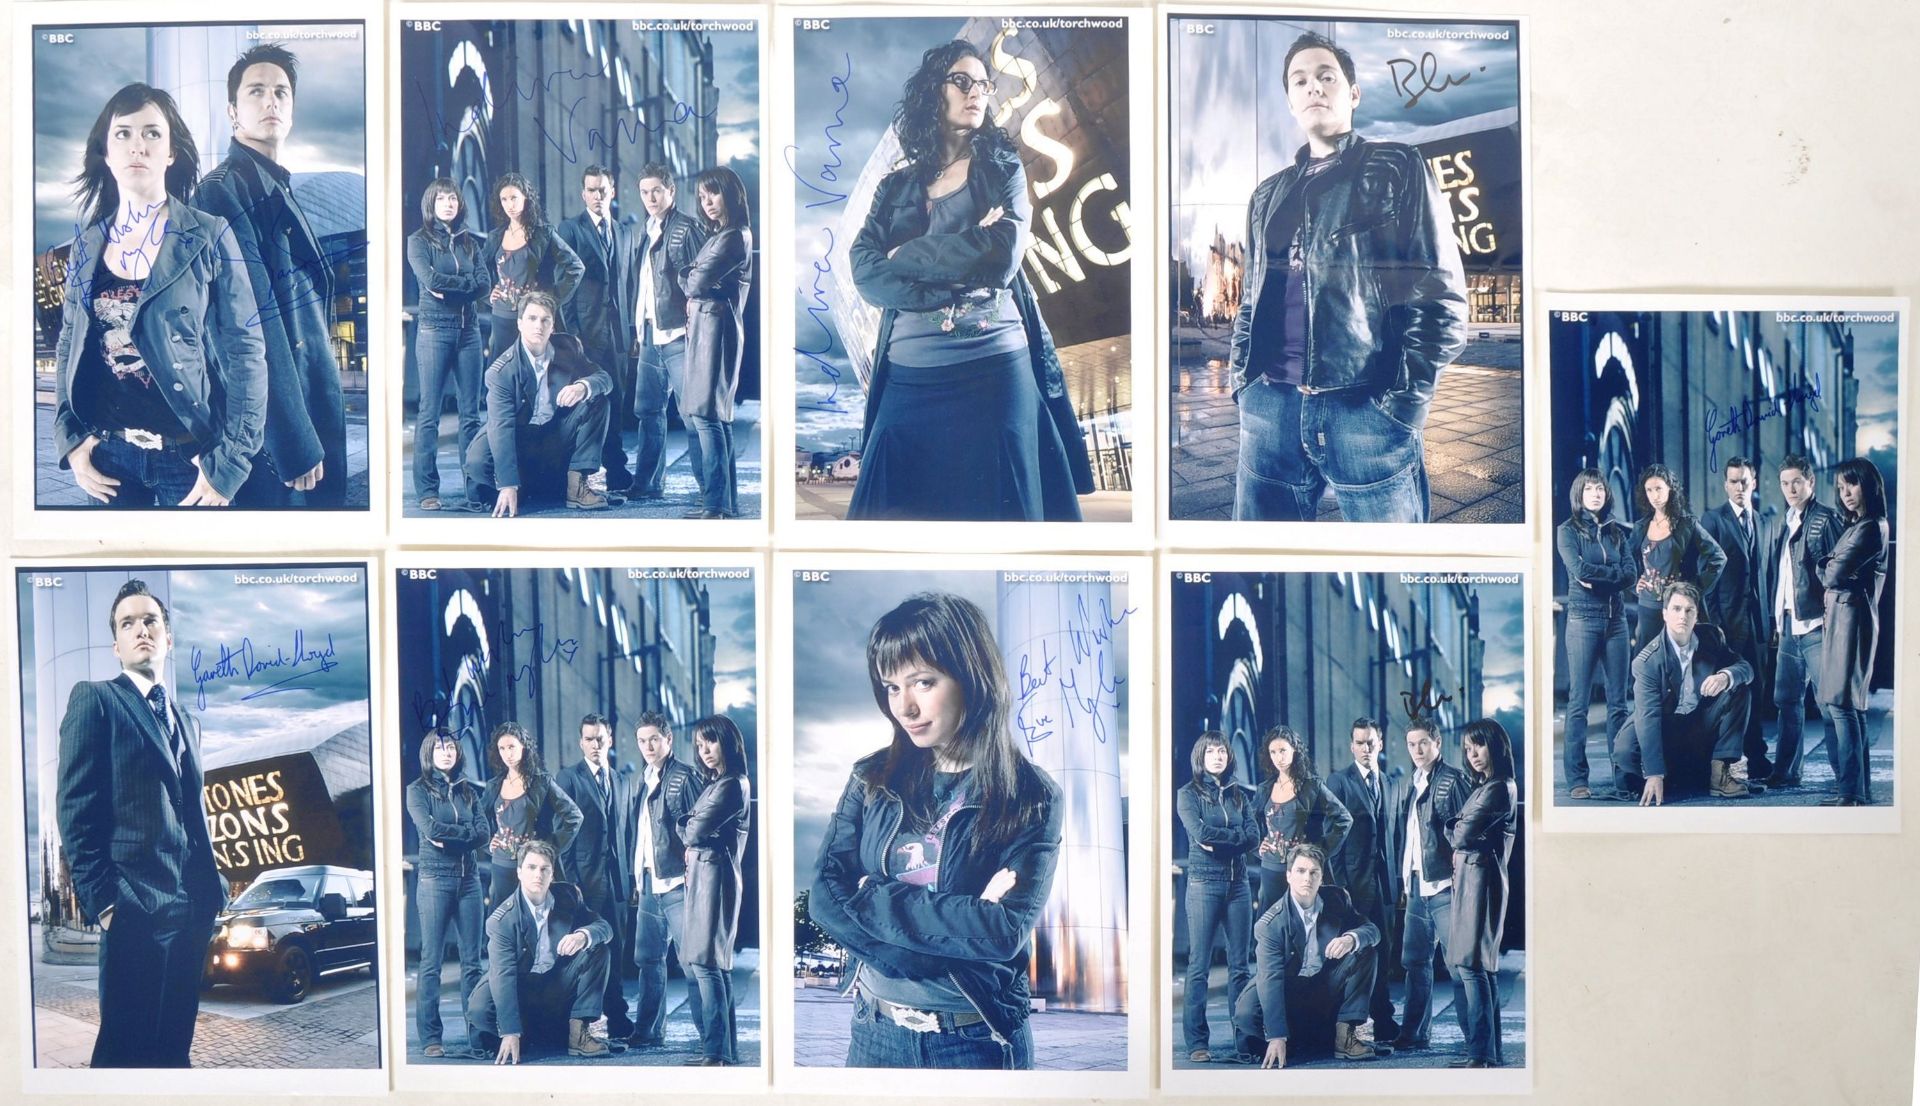 DOCTOR WHO - TORCHWOOD - LARGE COLLECTION OF CAST SIGNED PHOTOGRAPHS